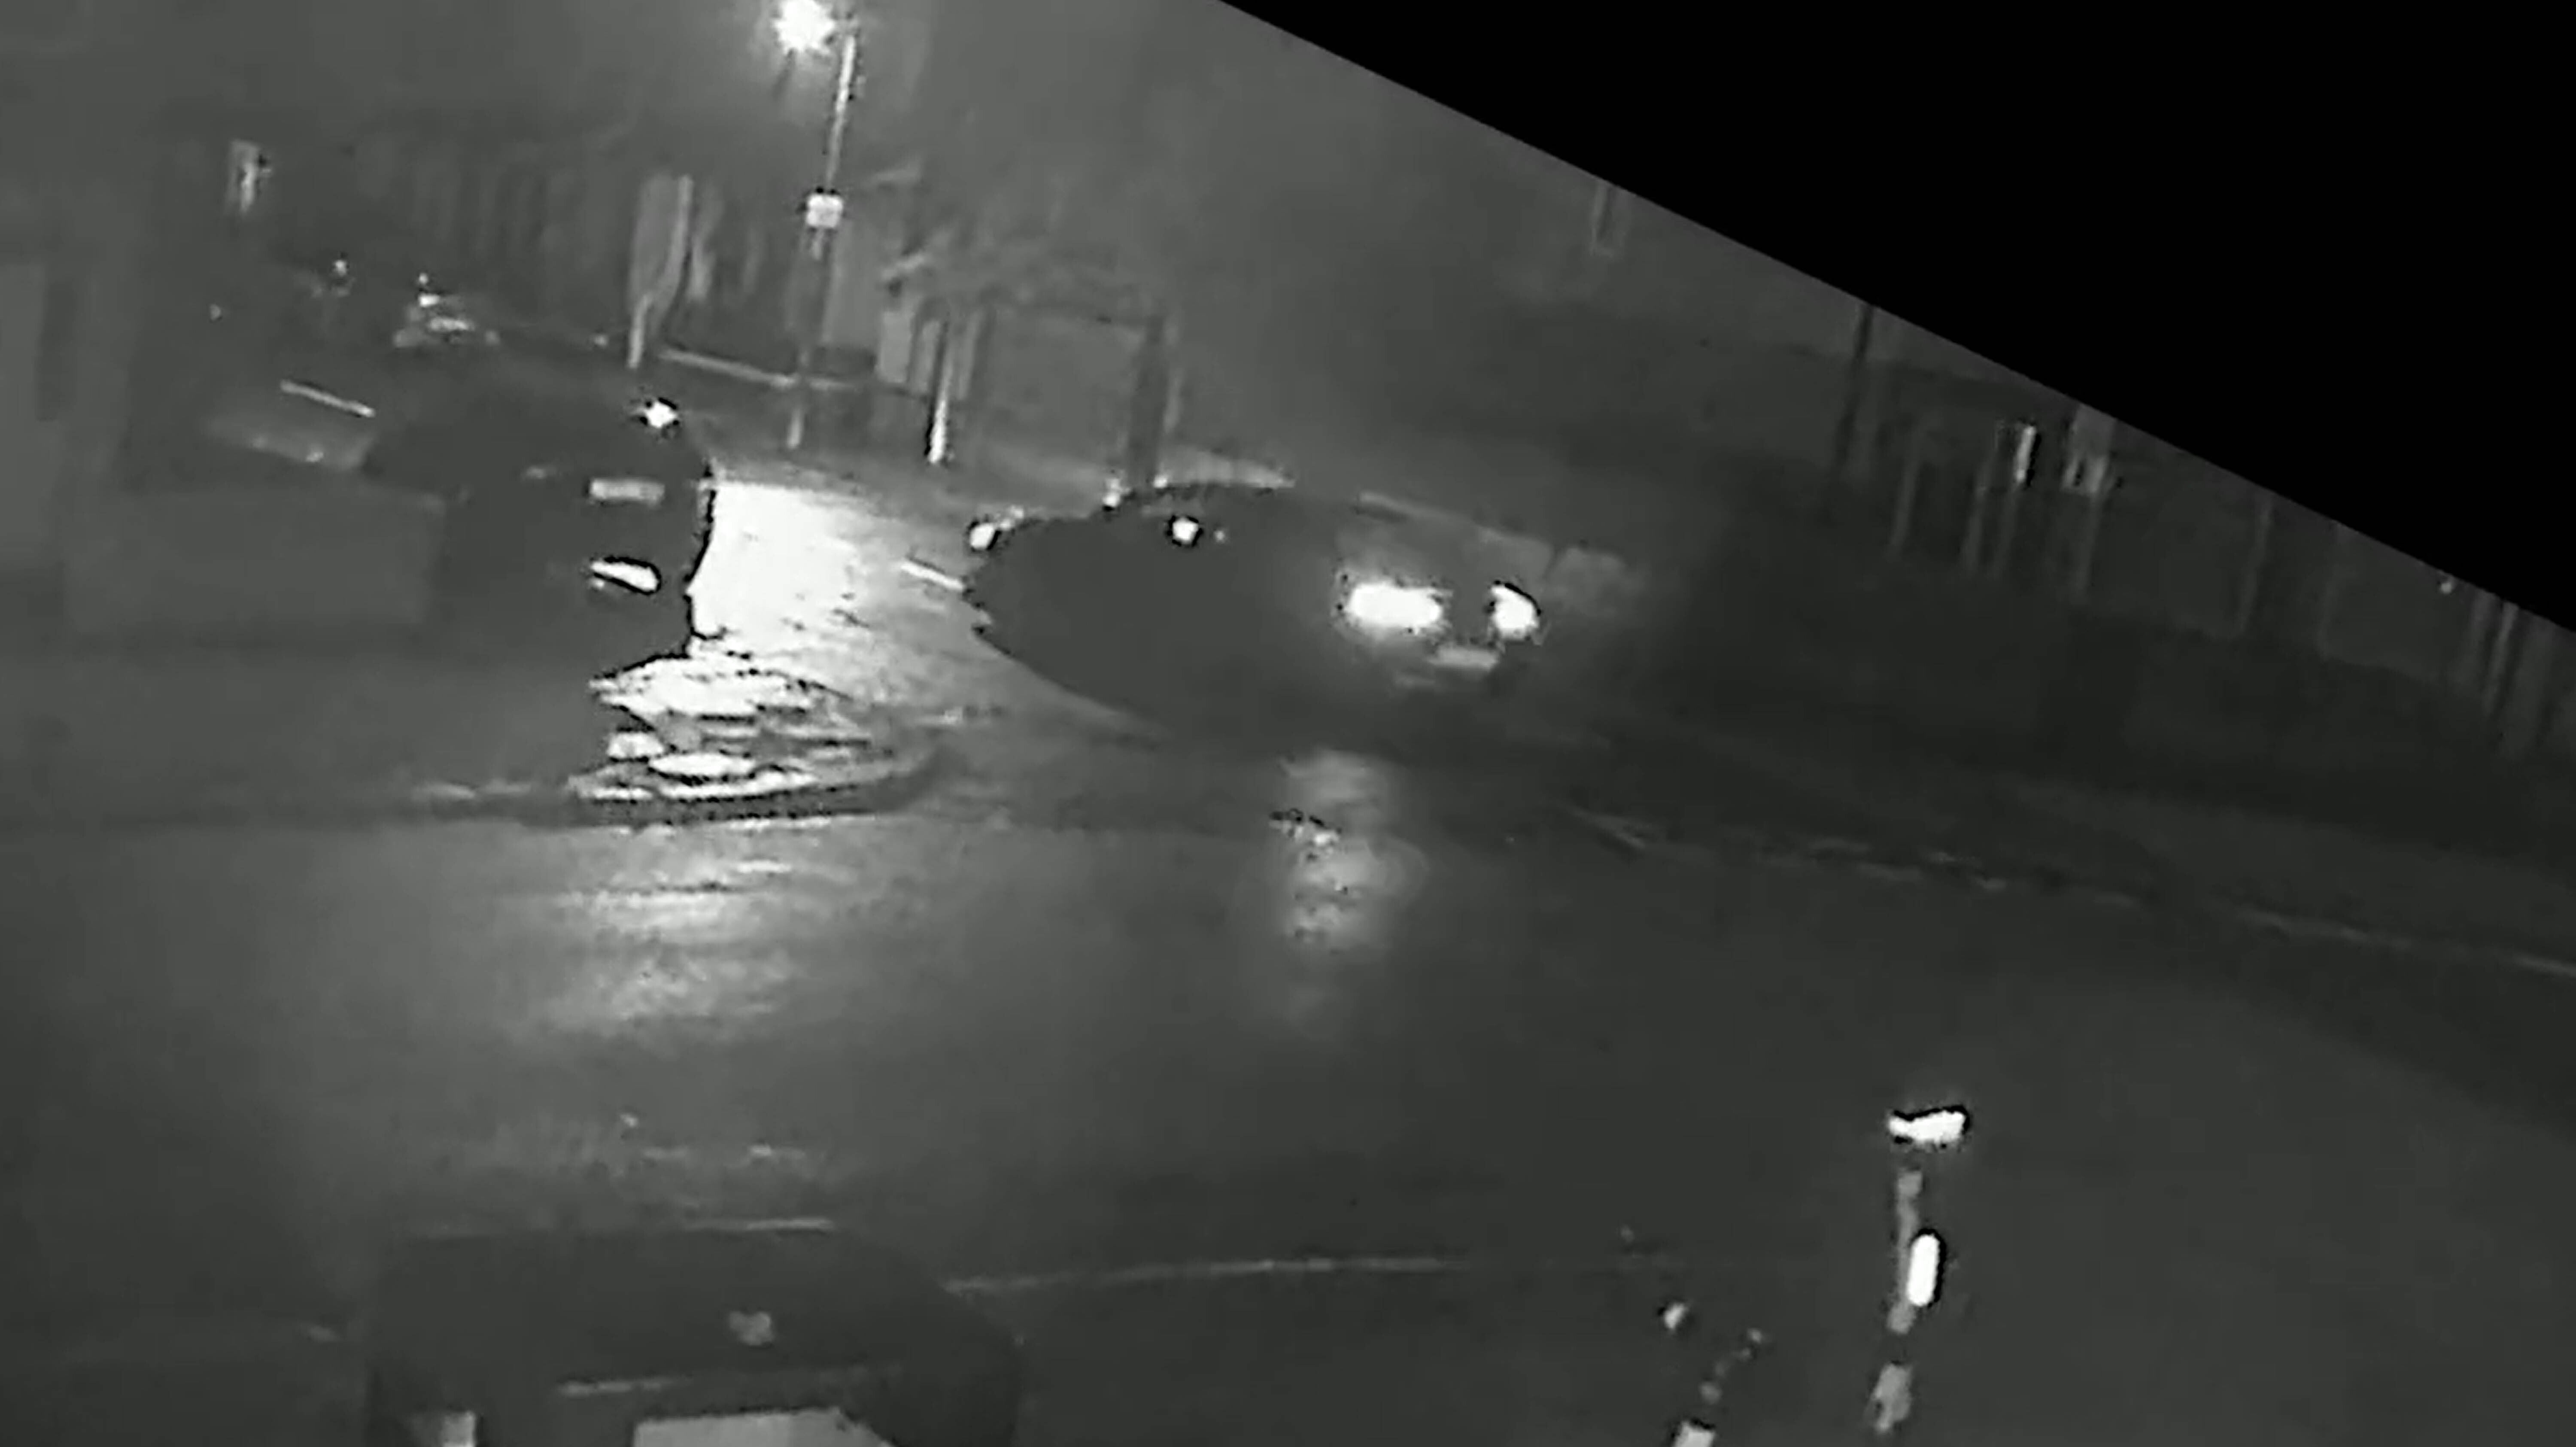 Grab taken from CCTV issued by Merseyside Police of a car being driven in the area of Old Swan, Liverpool. Detectives investigating the fatal shooting of 28-year-old Ashley Dale in Old Swan have released CCTV footage of a car being driven in the area (Merseyside Police/PA)